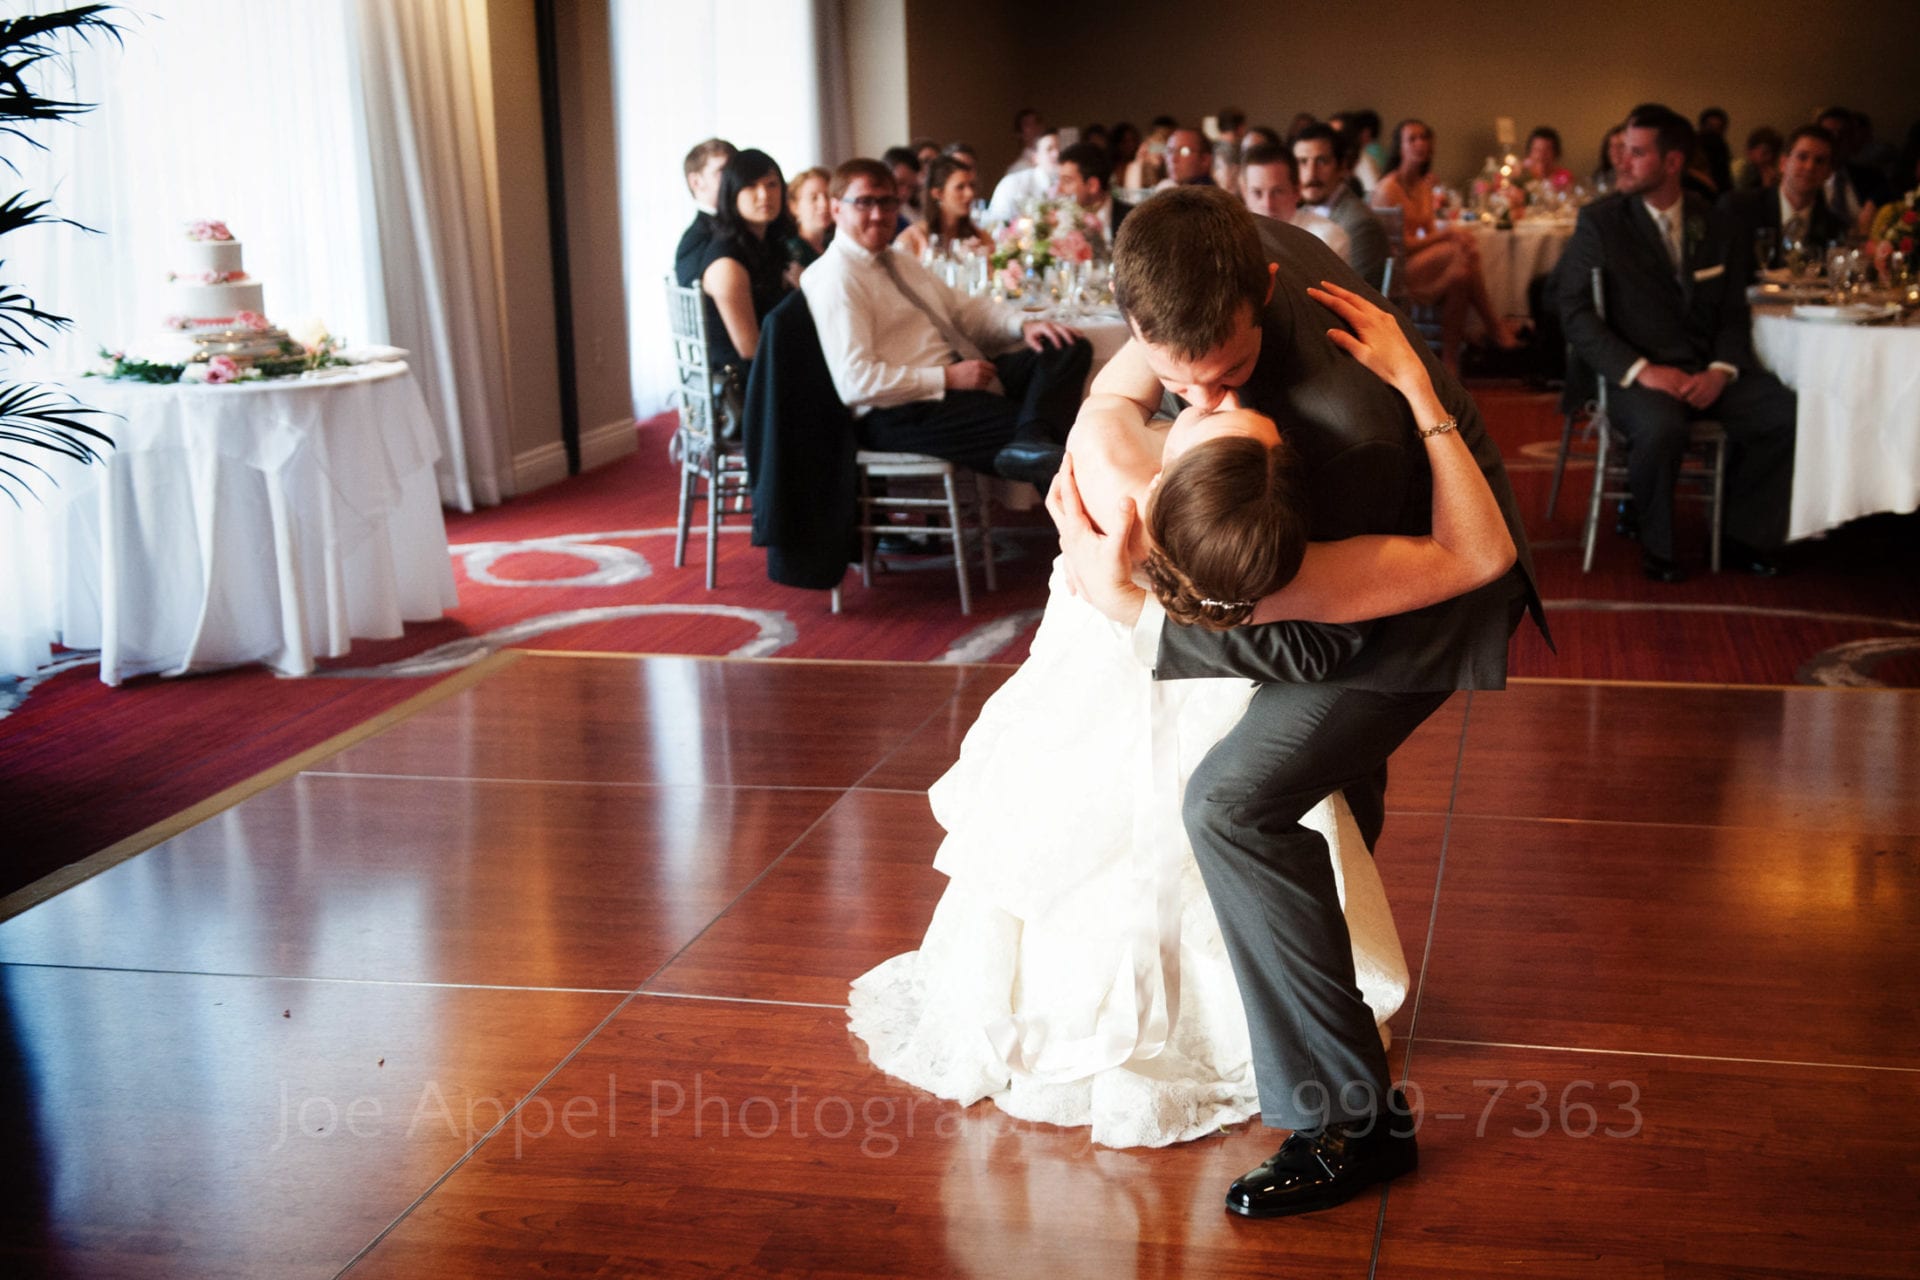 guests watch a groom dip his bride and kiss her